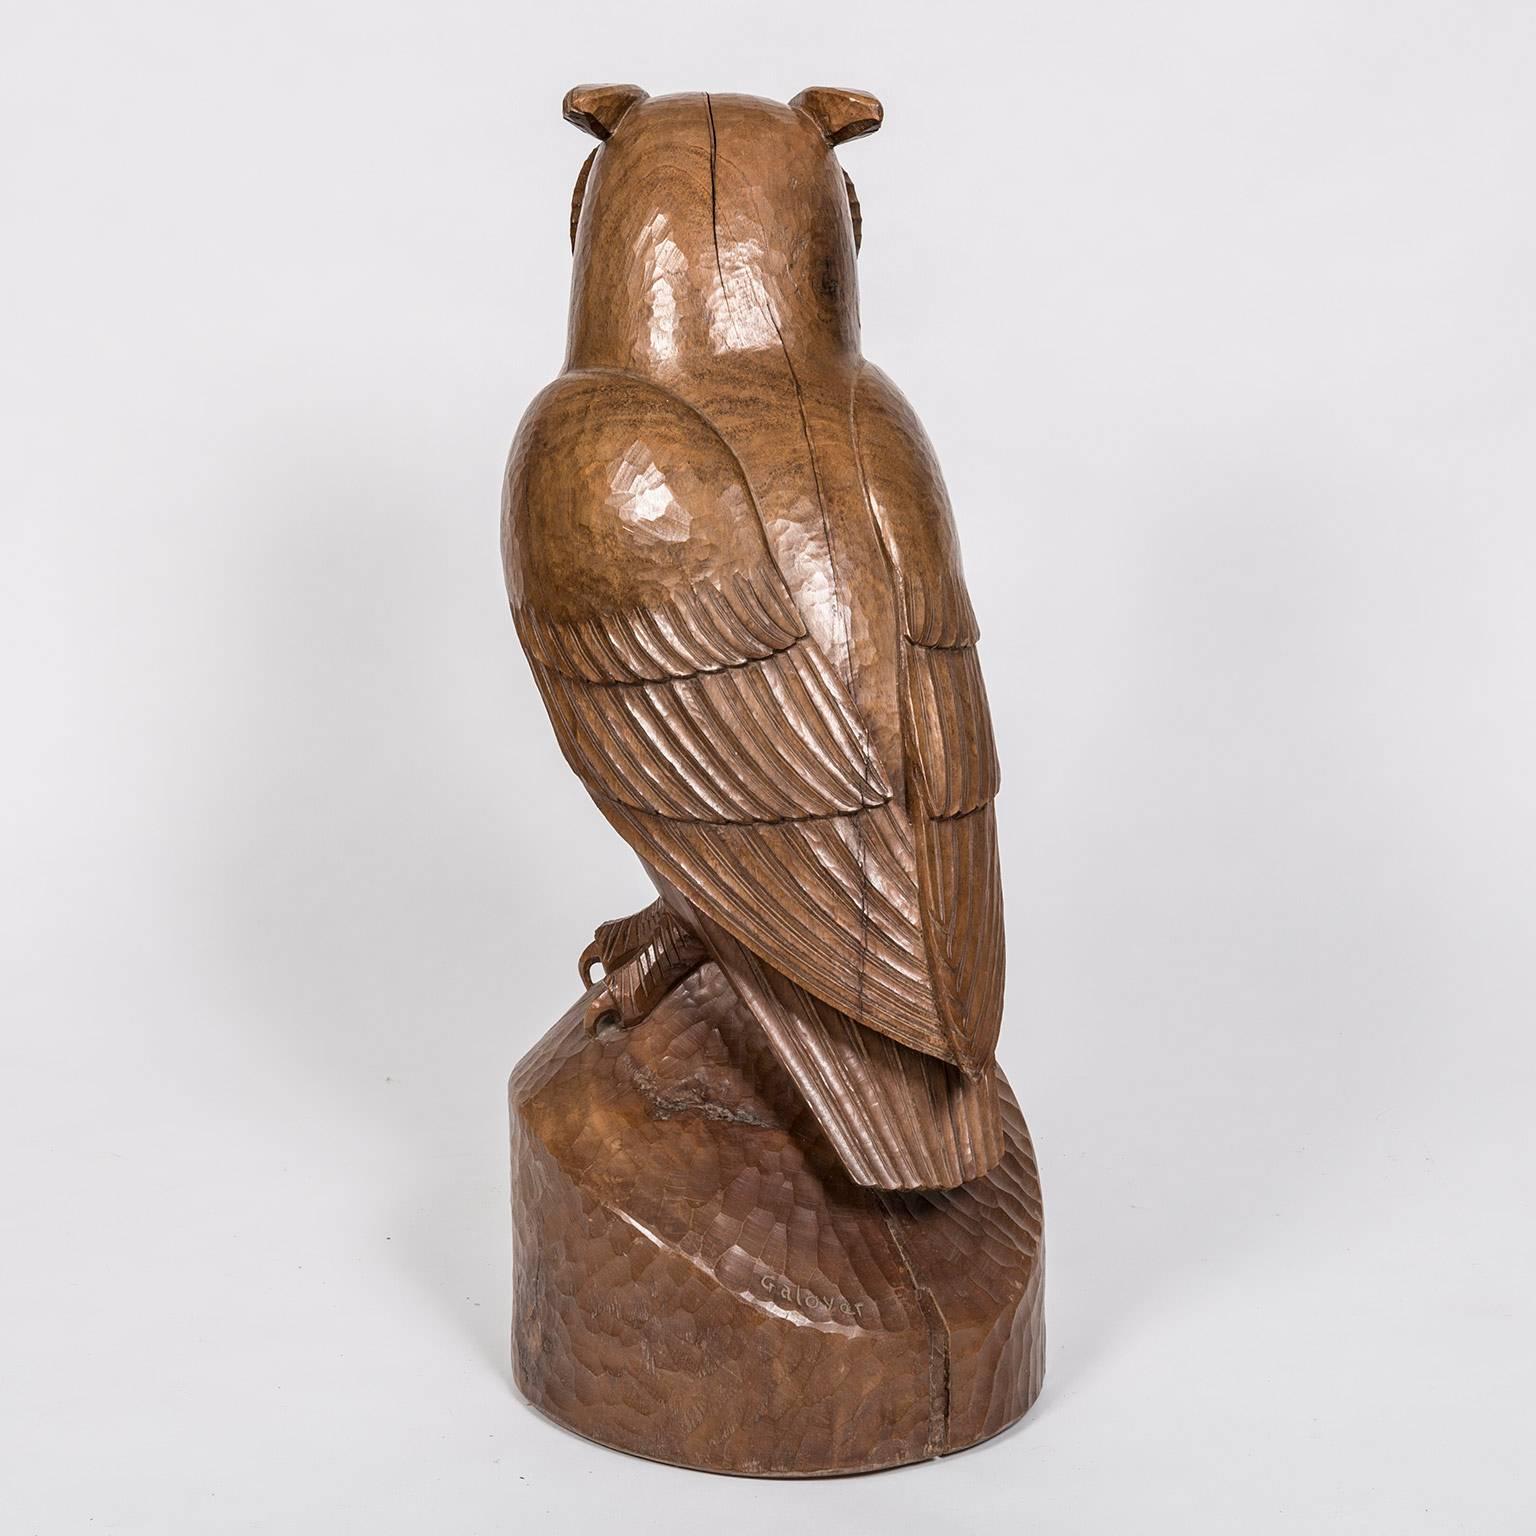 Owl -Hibou- carved rosewood bird sculpture by French artist François Galoyer born 1944. One of the more important animalier sculptures in terms of quality and size, the work is signed by the artist near the tail.